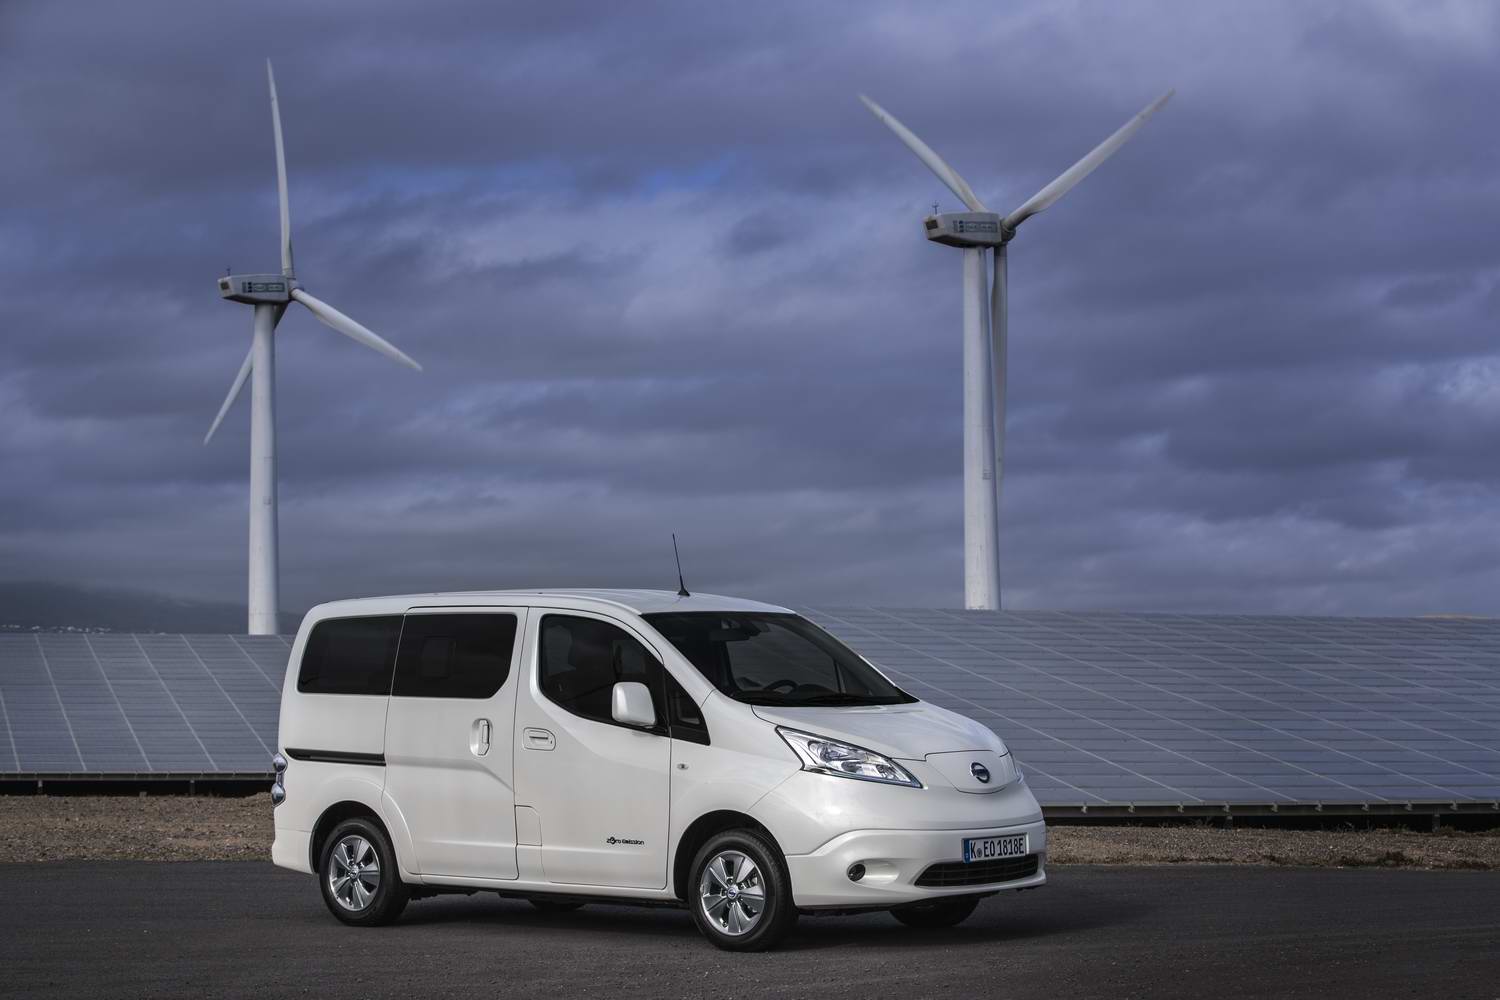 I want to buy an electric van...